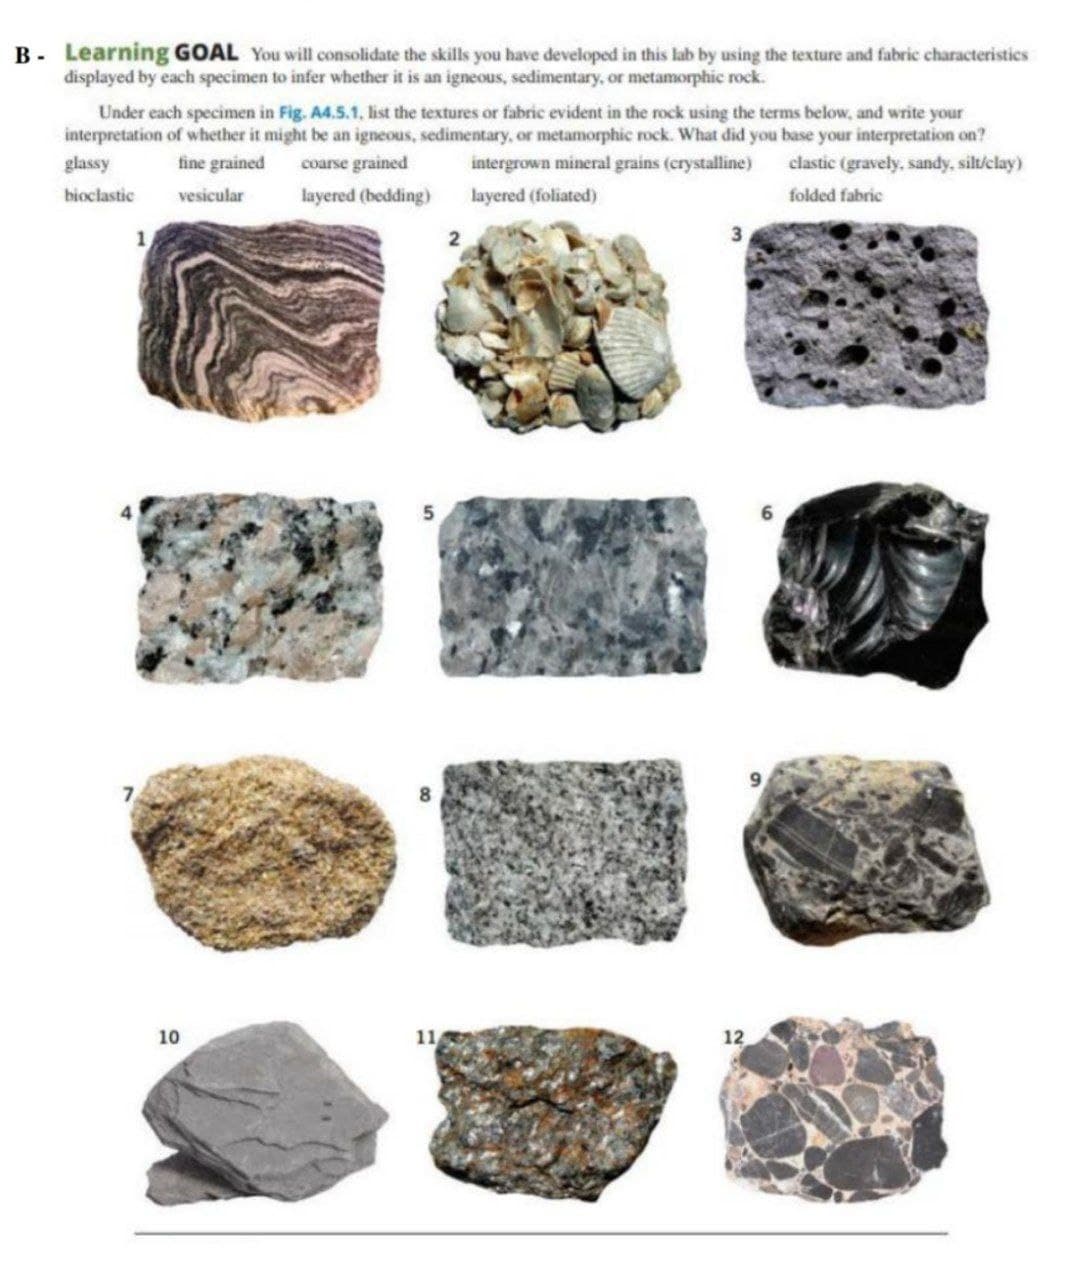 B - Learning GOAL You will consolidate the skills you have developed in this lab by using the texture and fabric characteristics
displayed by each specimen to infer whether it is an igneous, sedimentary, or metamorphic rock.
Under each specimen in Fig. A4.5.1, list the textures or fabric evident in the rock using the terms below, and write your
interpretation of whether it might be an igneous, sedimentary, or metamorphic rock. What did you base your interpretation on?
glassy
fine grained
coarse grained
intergrown mineral grains (crystalline)
clastic (gravely, sandy, silt/clay)
bioclastic
vesicular
layered (bedding)
layered (foliated)
folded fabric
1
10
12
